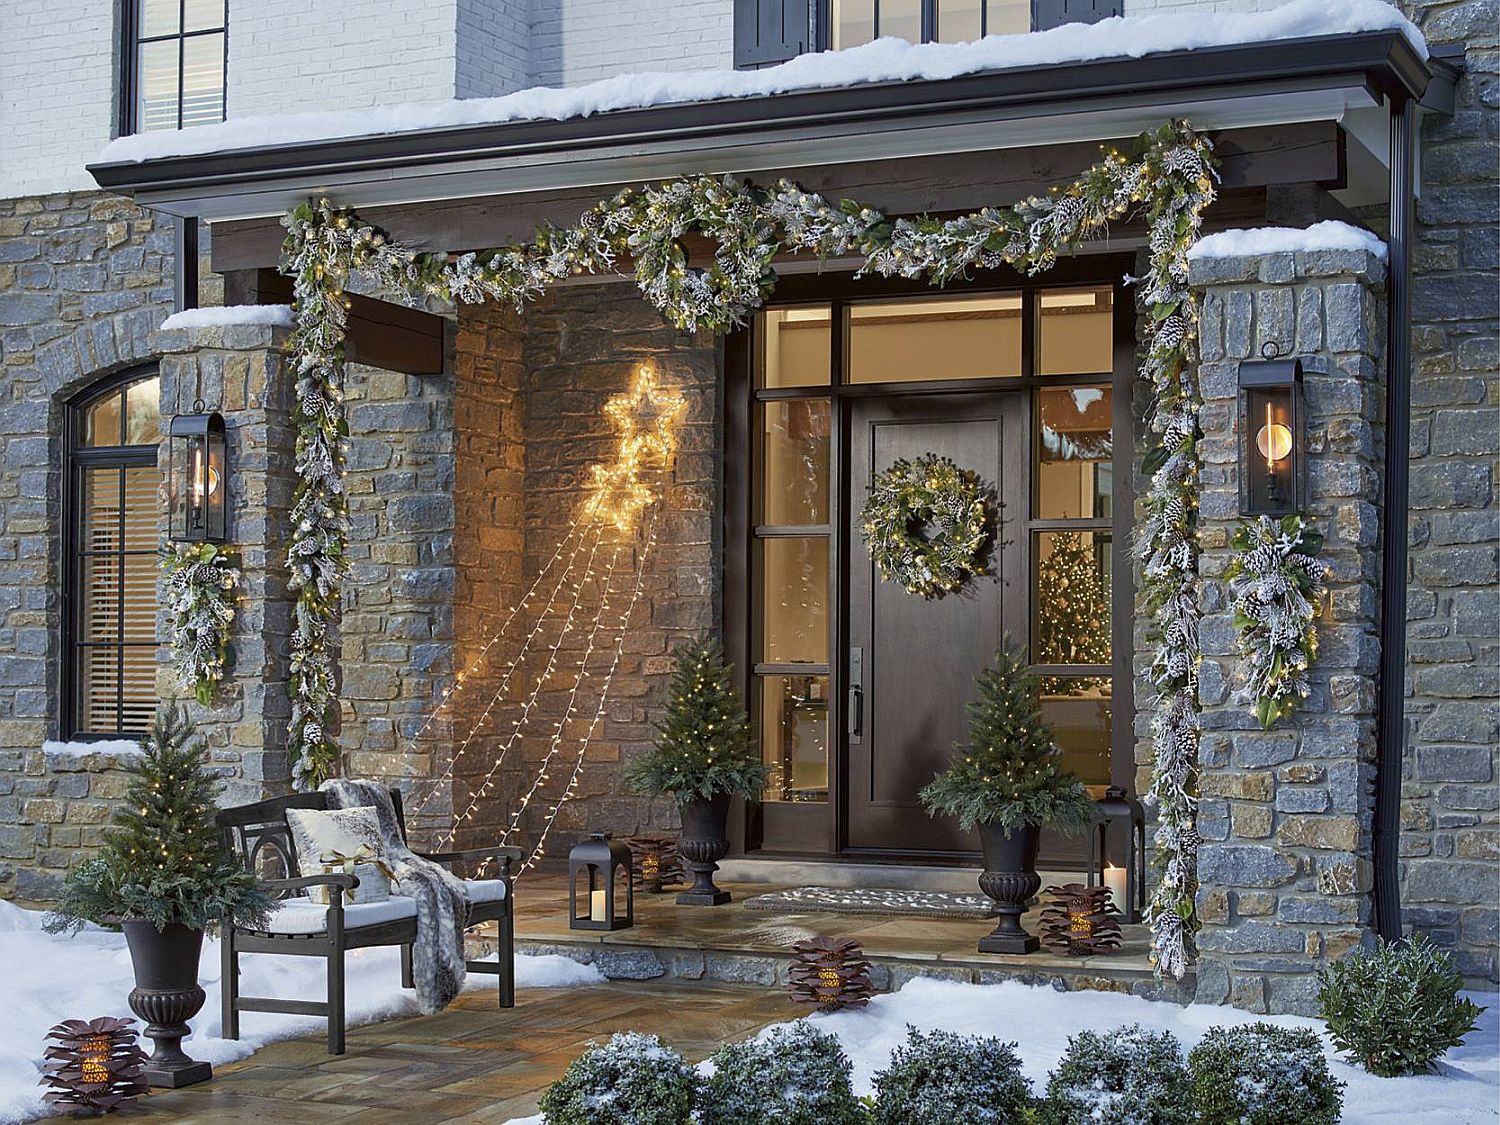 Go-beyond-an-overload-of-red-to-deck-the-porch-with-festive-charm-this-Holiday-Season